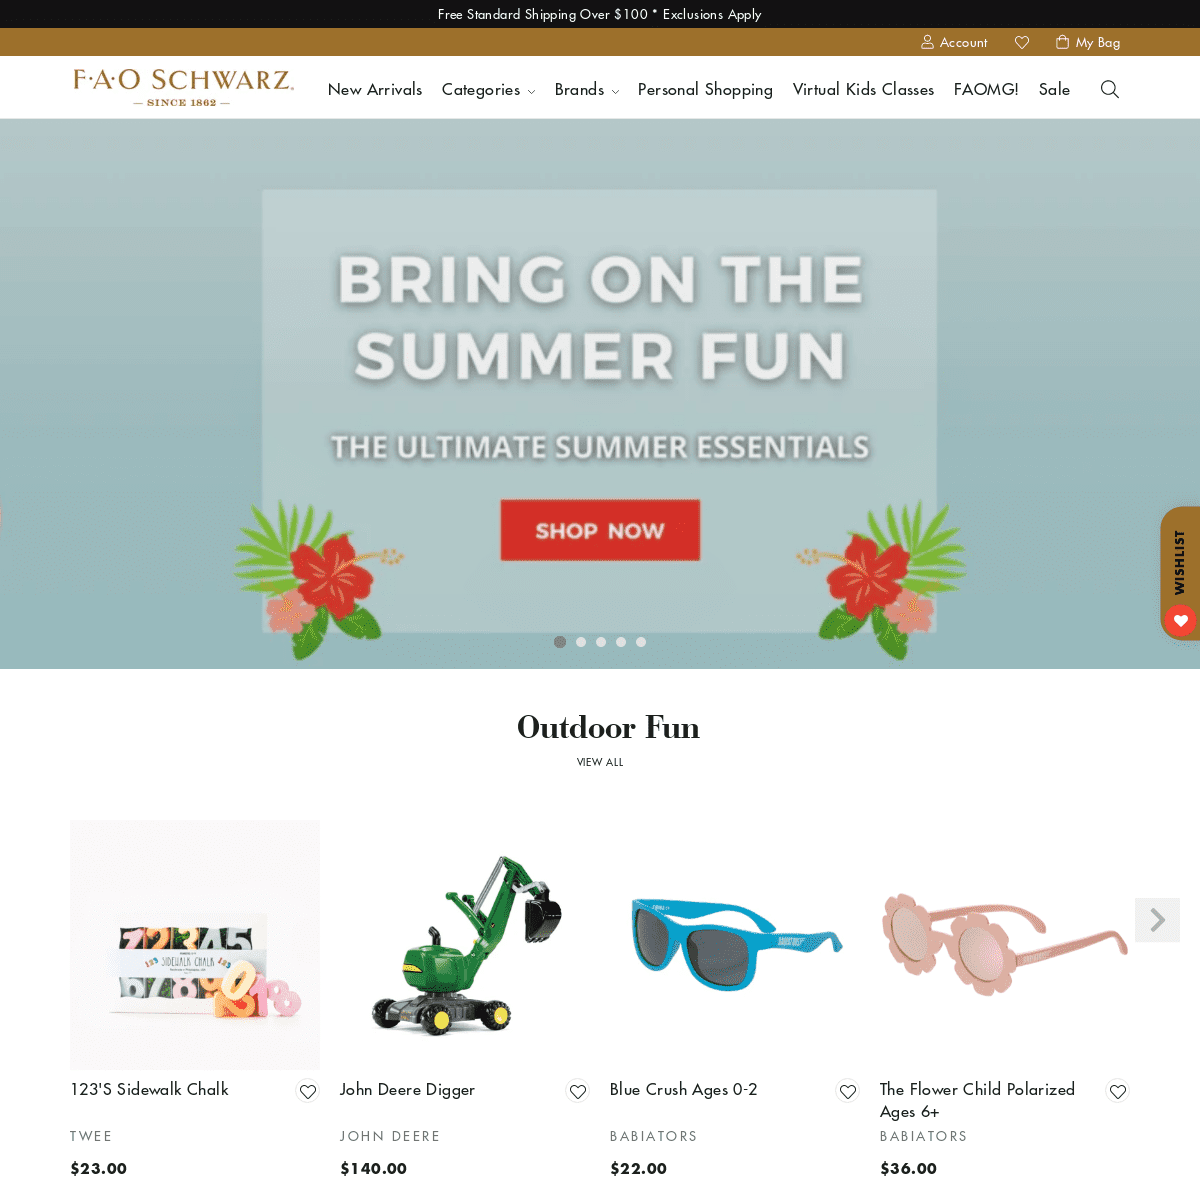 A complete backup of https://faoschwarz.com